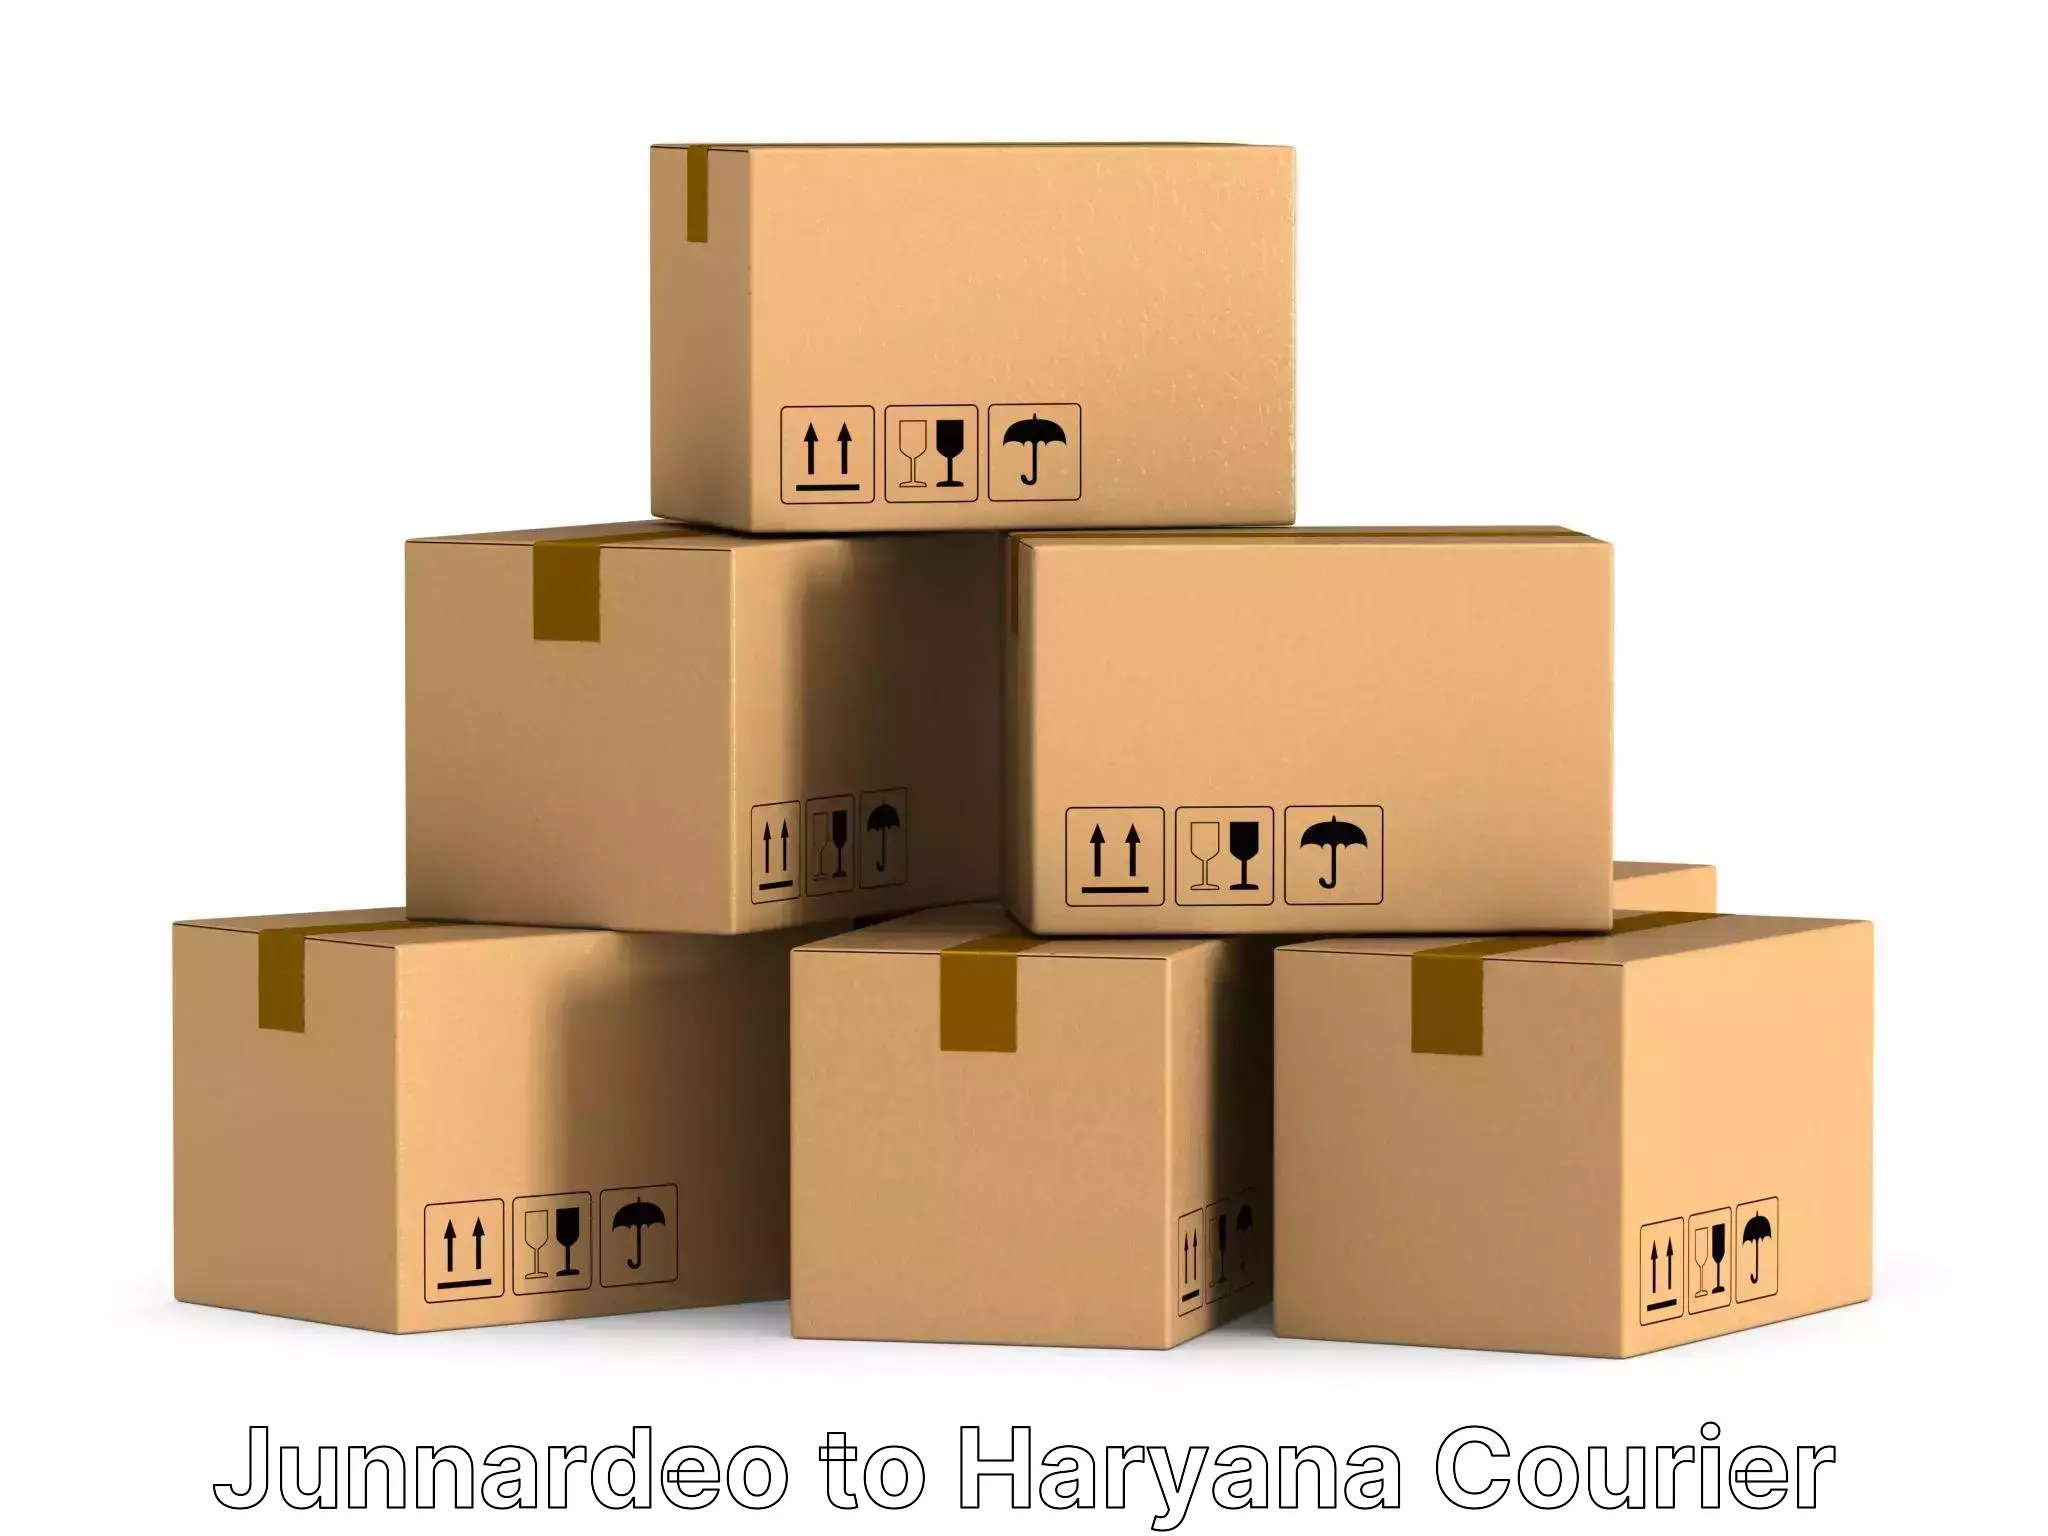 Efficient relocation services Junnardeo to Panchkula